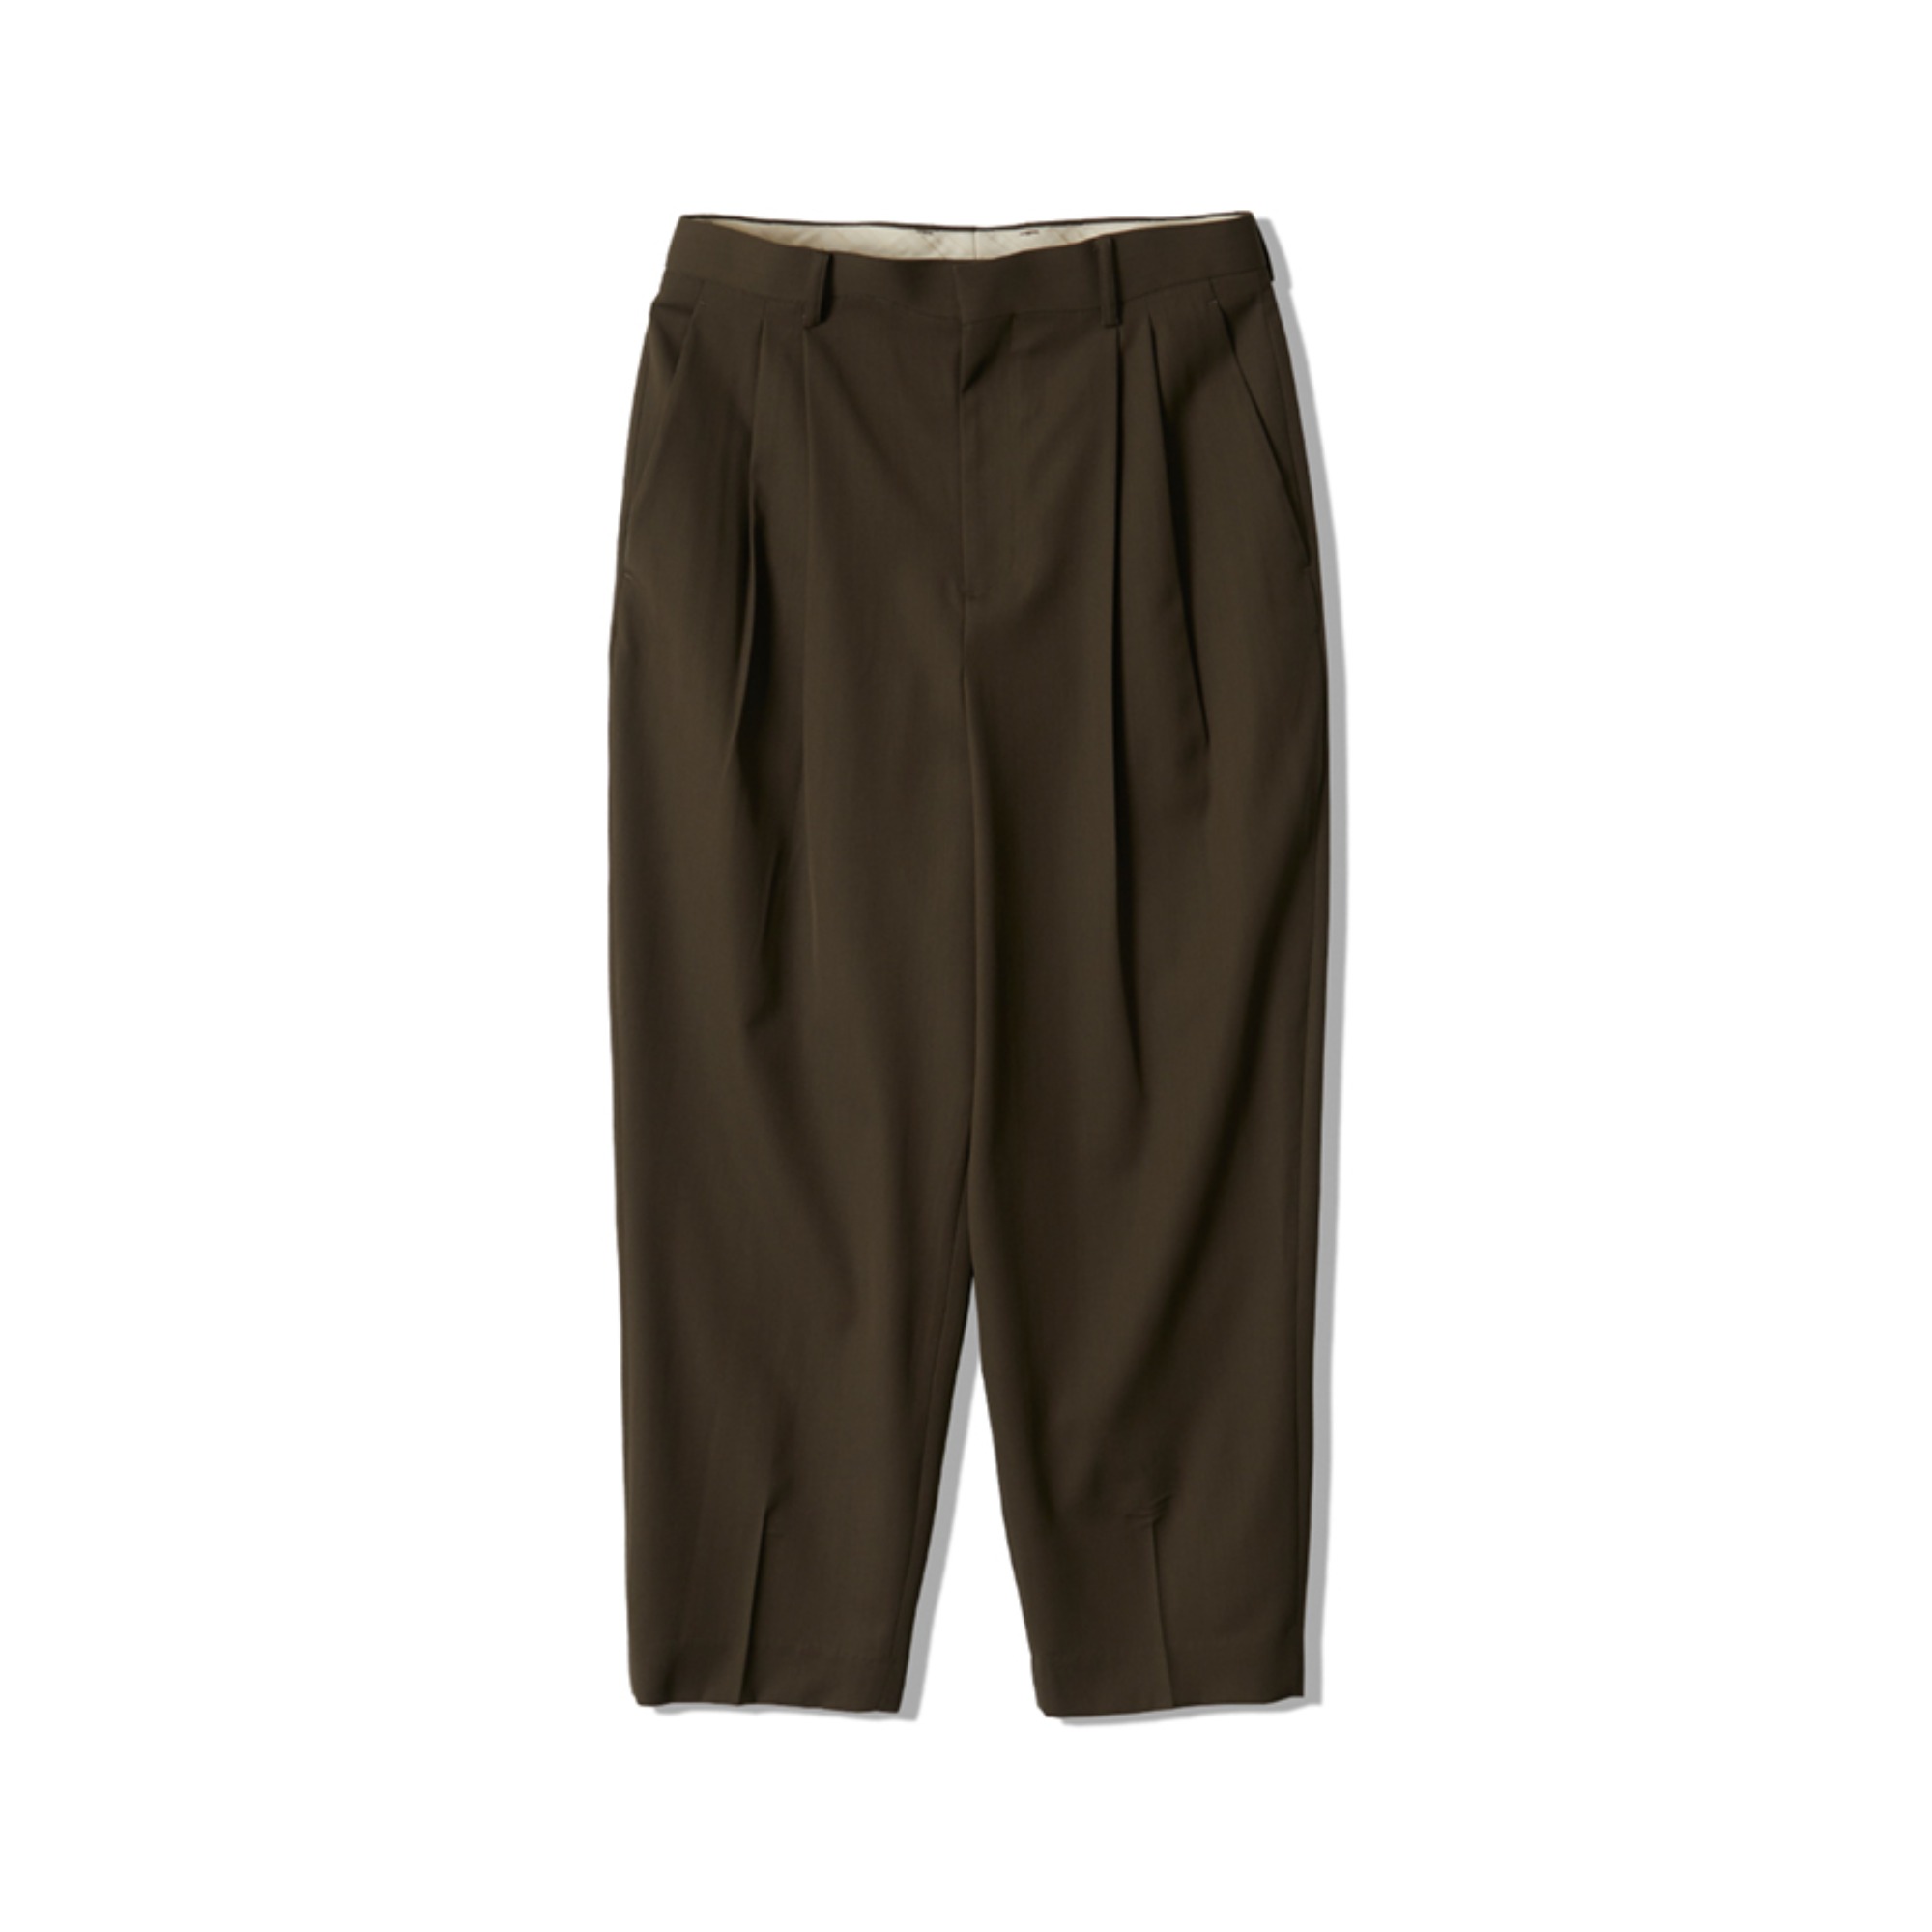 2TUCK TAPERED PANTS 2 (OLIVE)